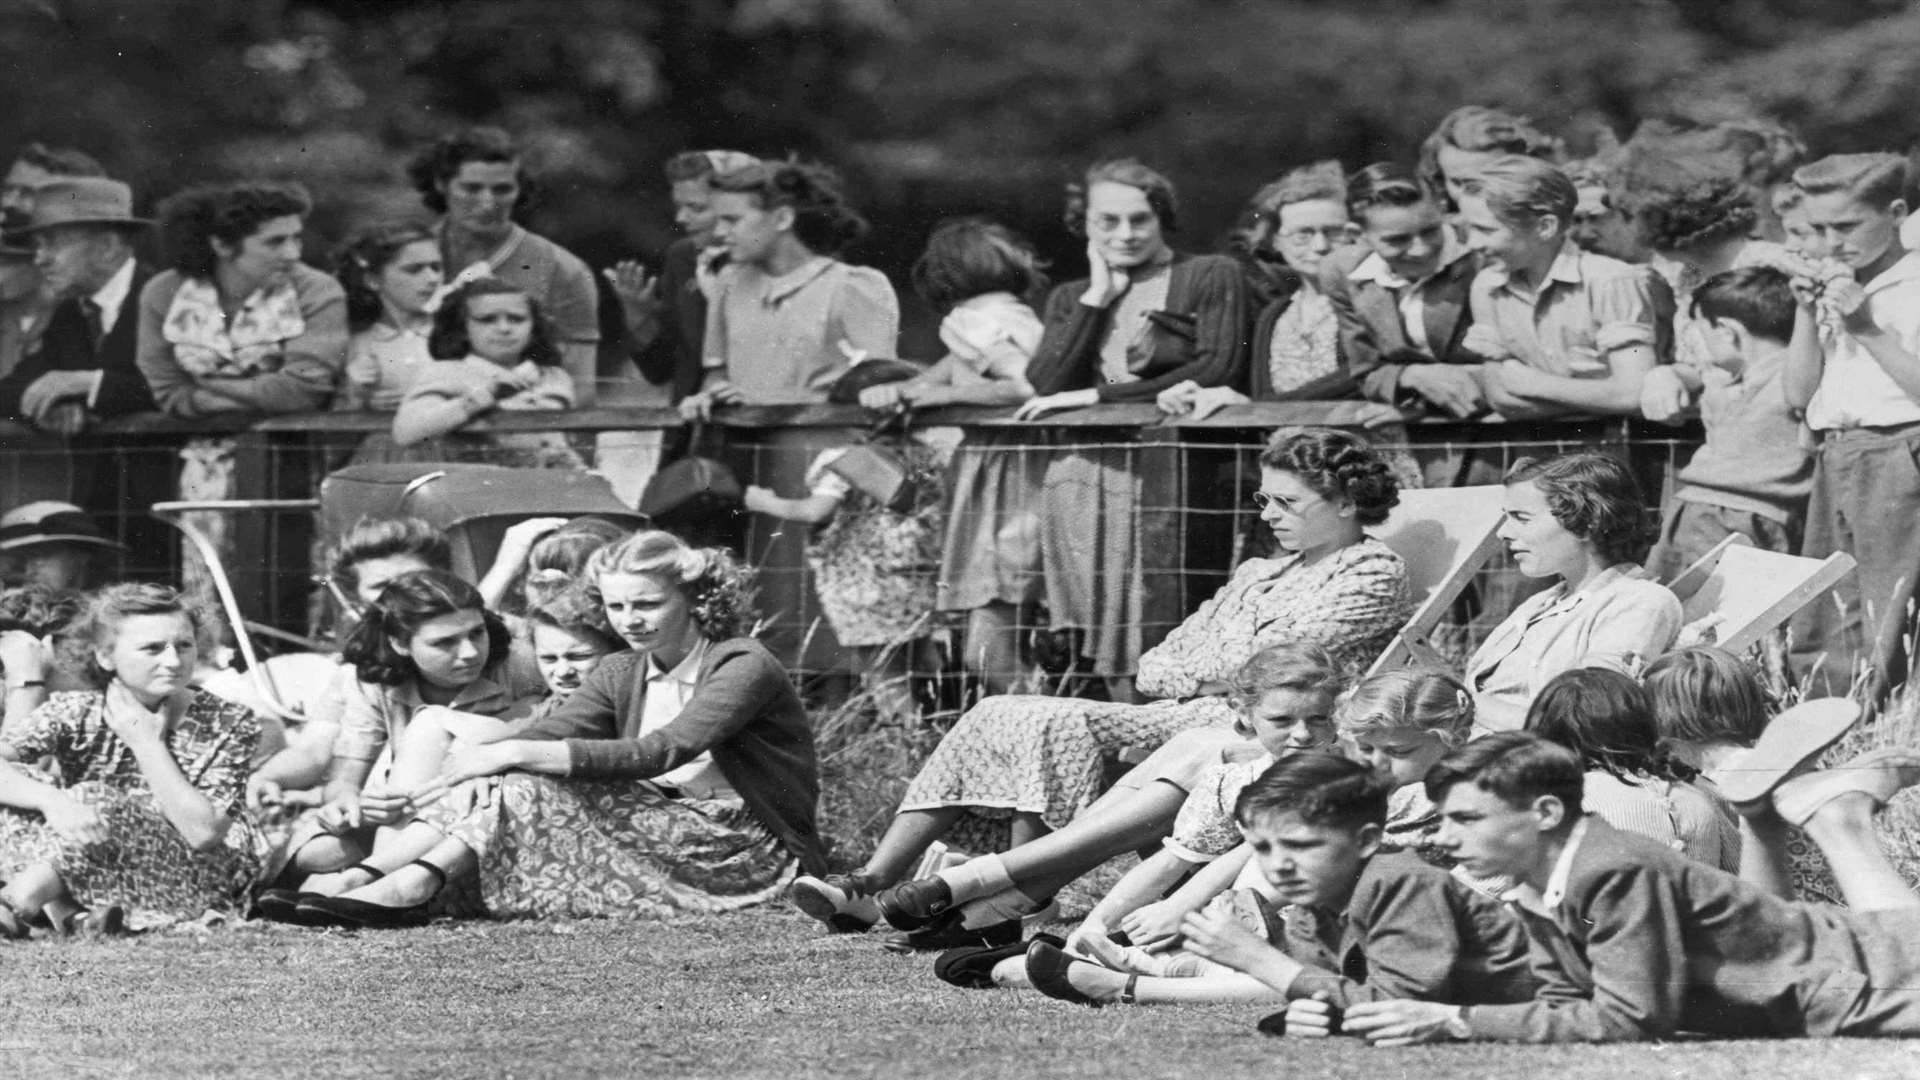 The Queen and Lady Brabourne relax in deck chairs watching cricket at Mersham-le-Hatch. Picture: "Images of Ashford" book by Mike Bennett